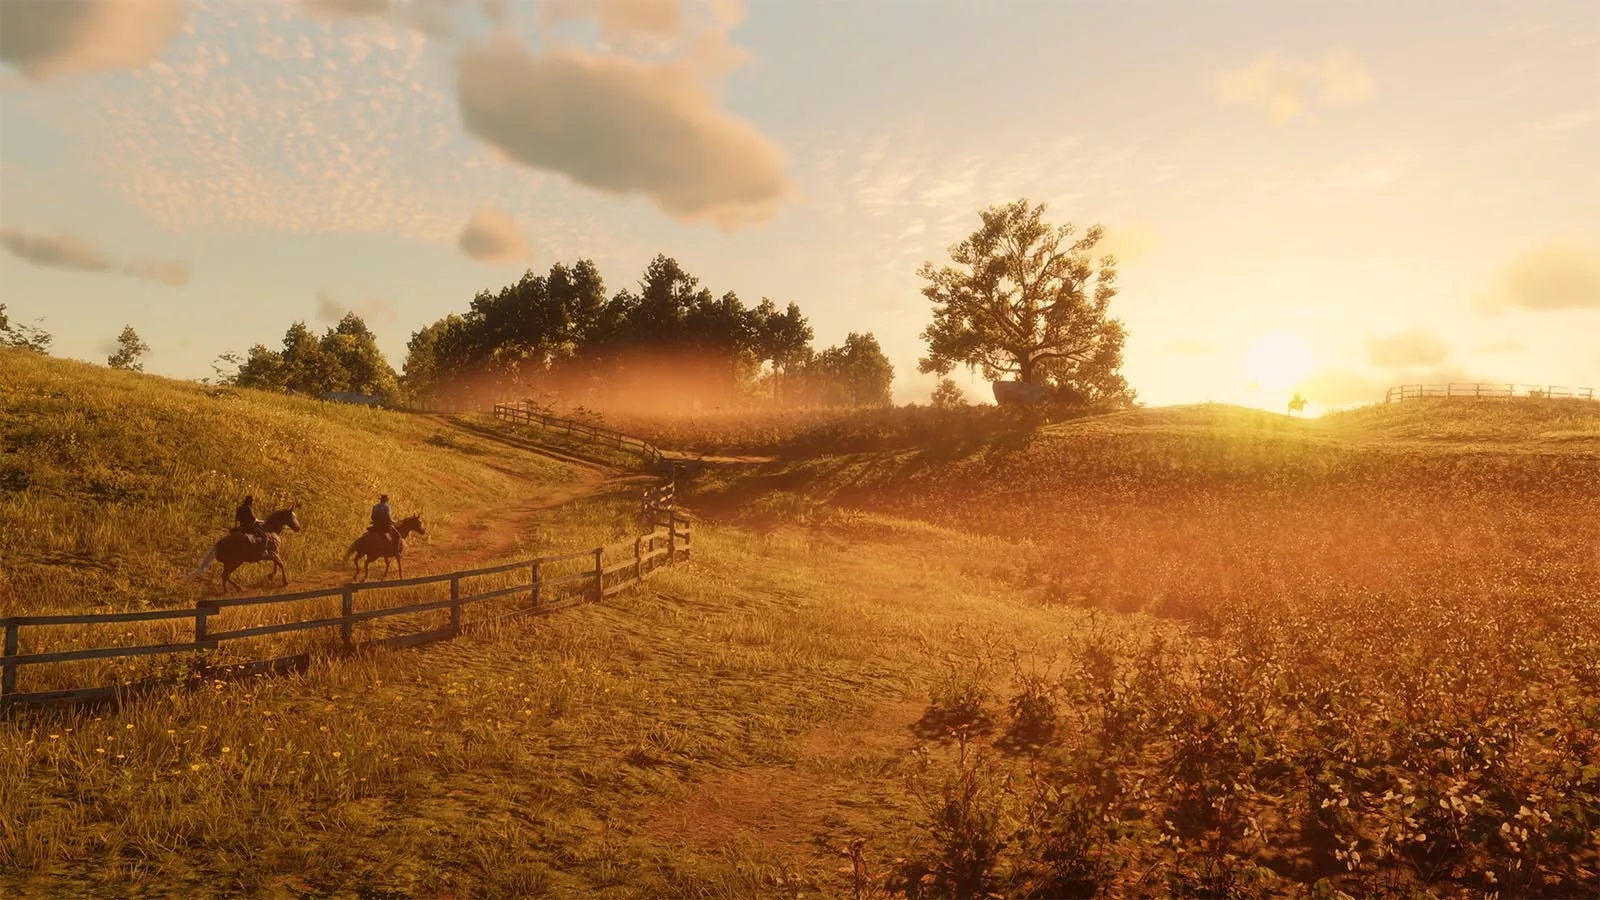 Two character ride horses along a fence line in a field, during the sunset.